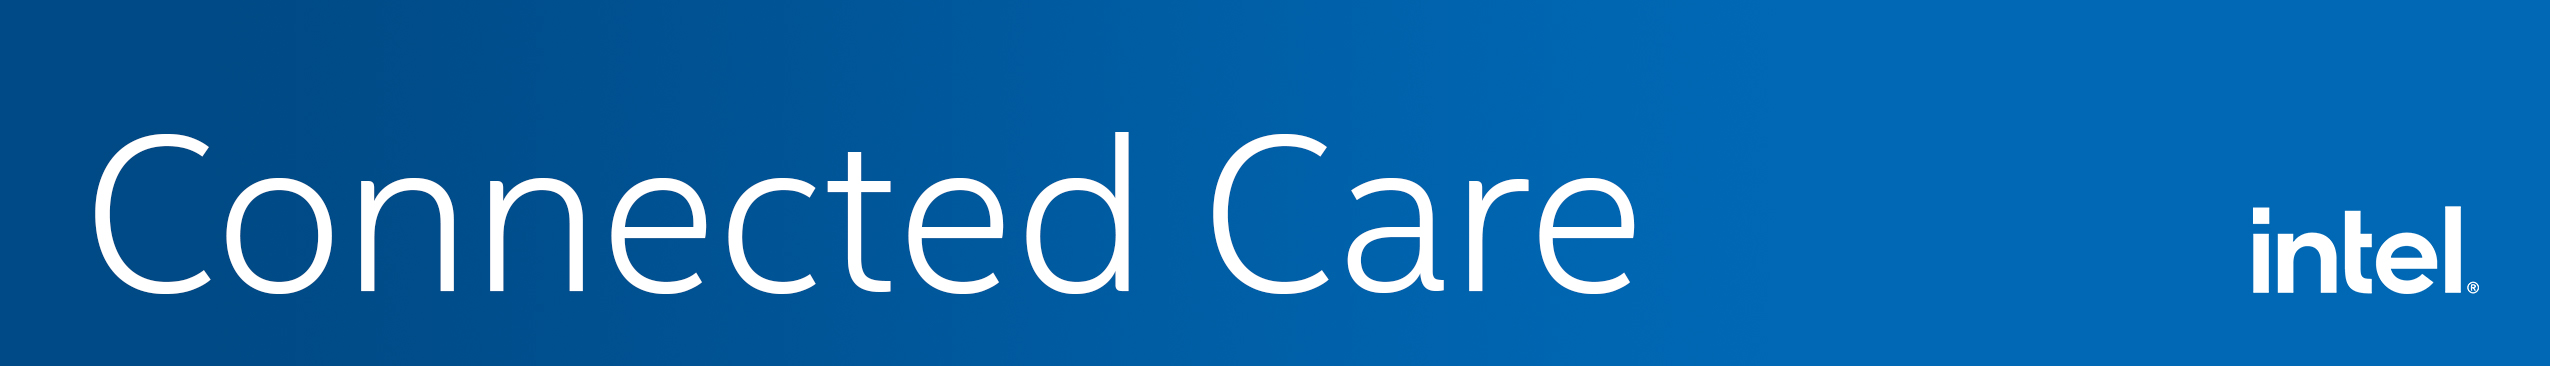 connected care logo